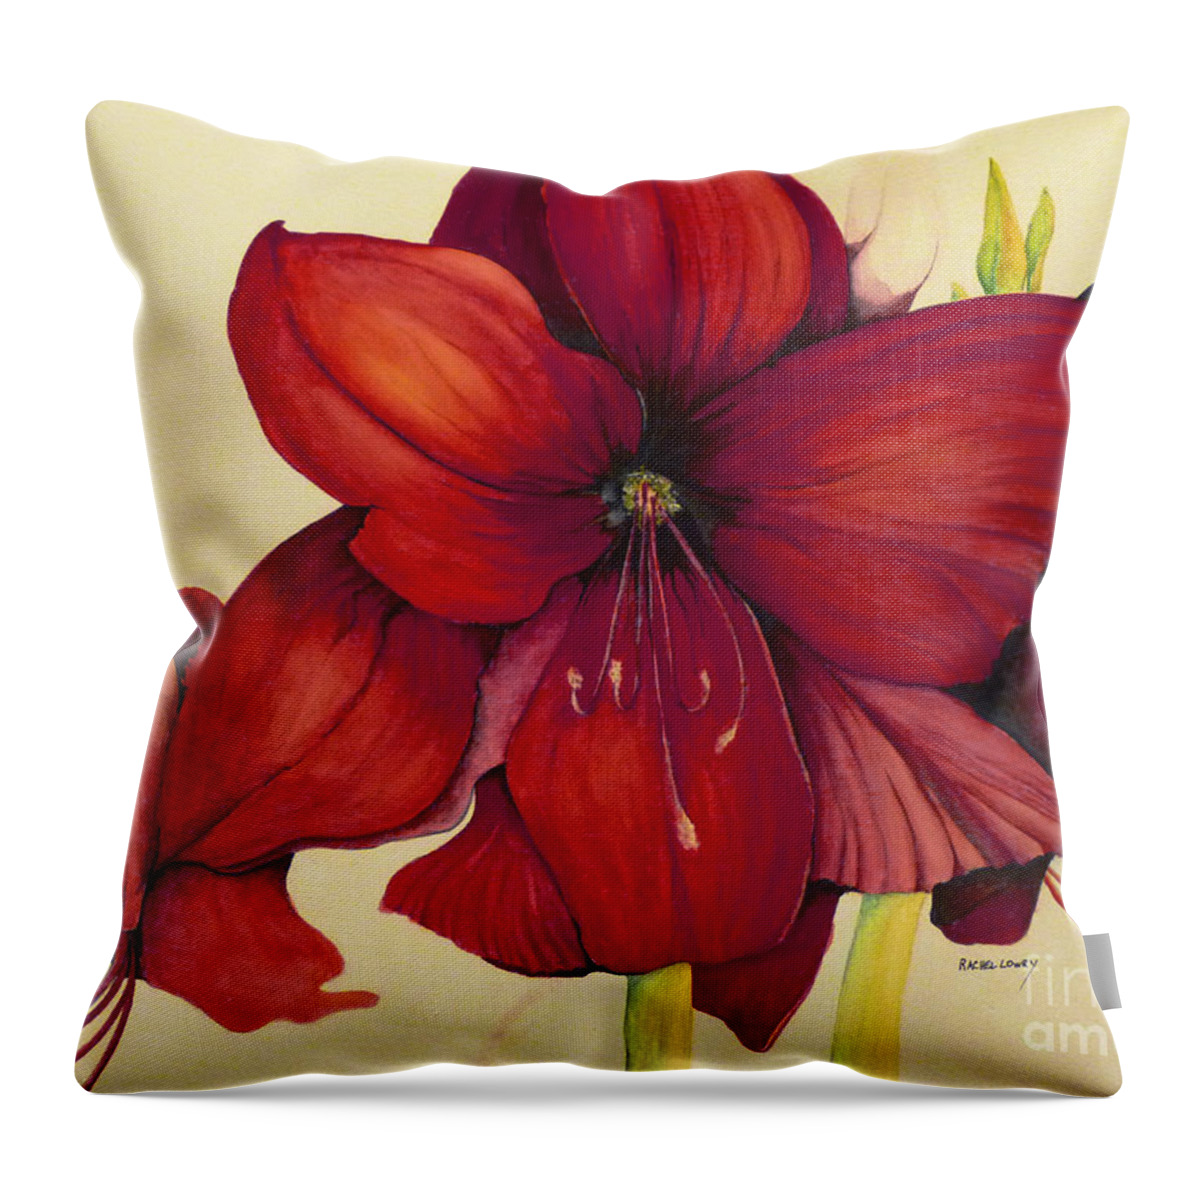 Amaryllis Throw Pillow featuring the painting RED Christmas Amaryllis by Rachel Lowry